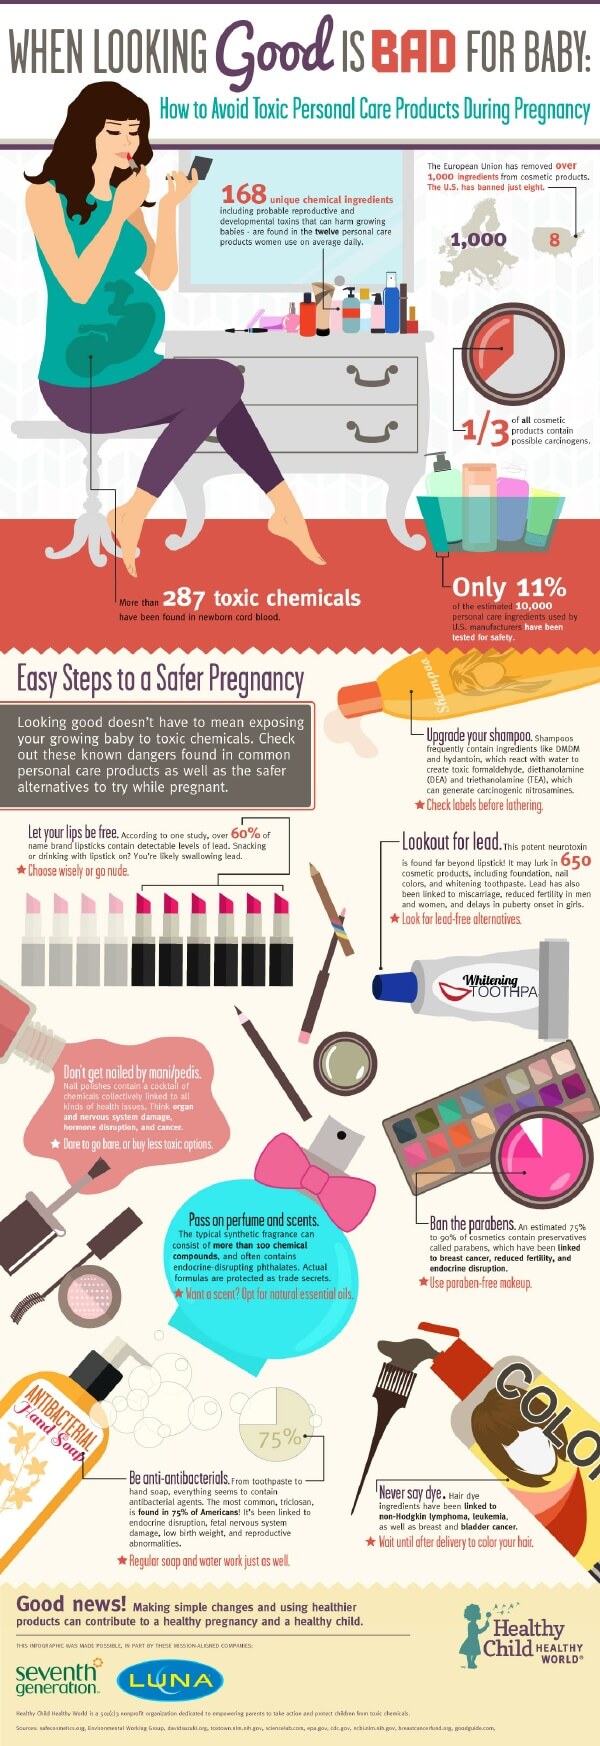 How To Avoid Toxic Personal Care Products During Pregnancy